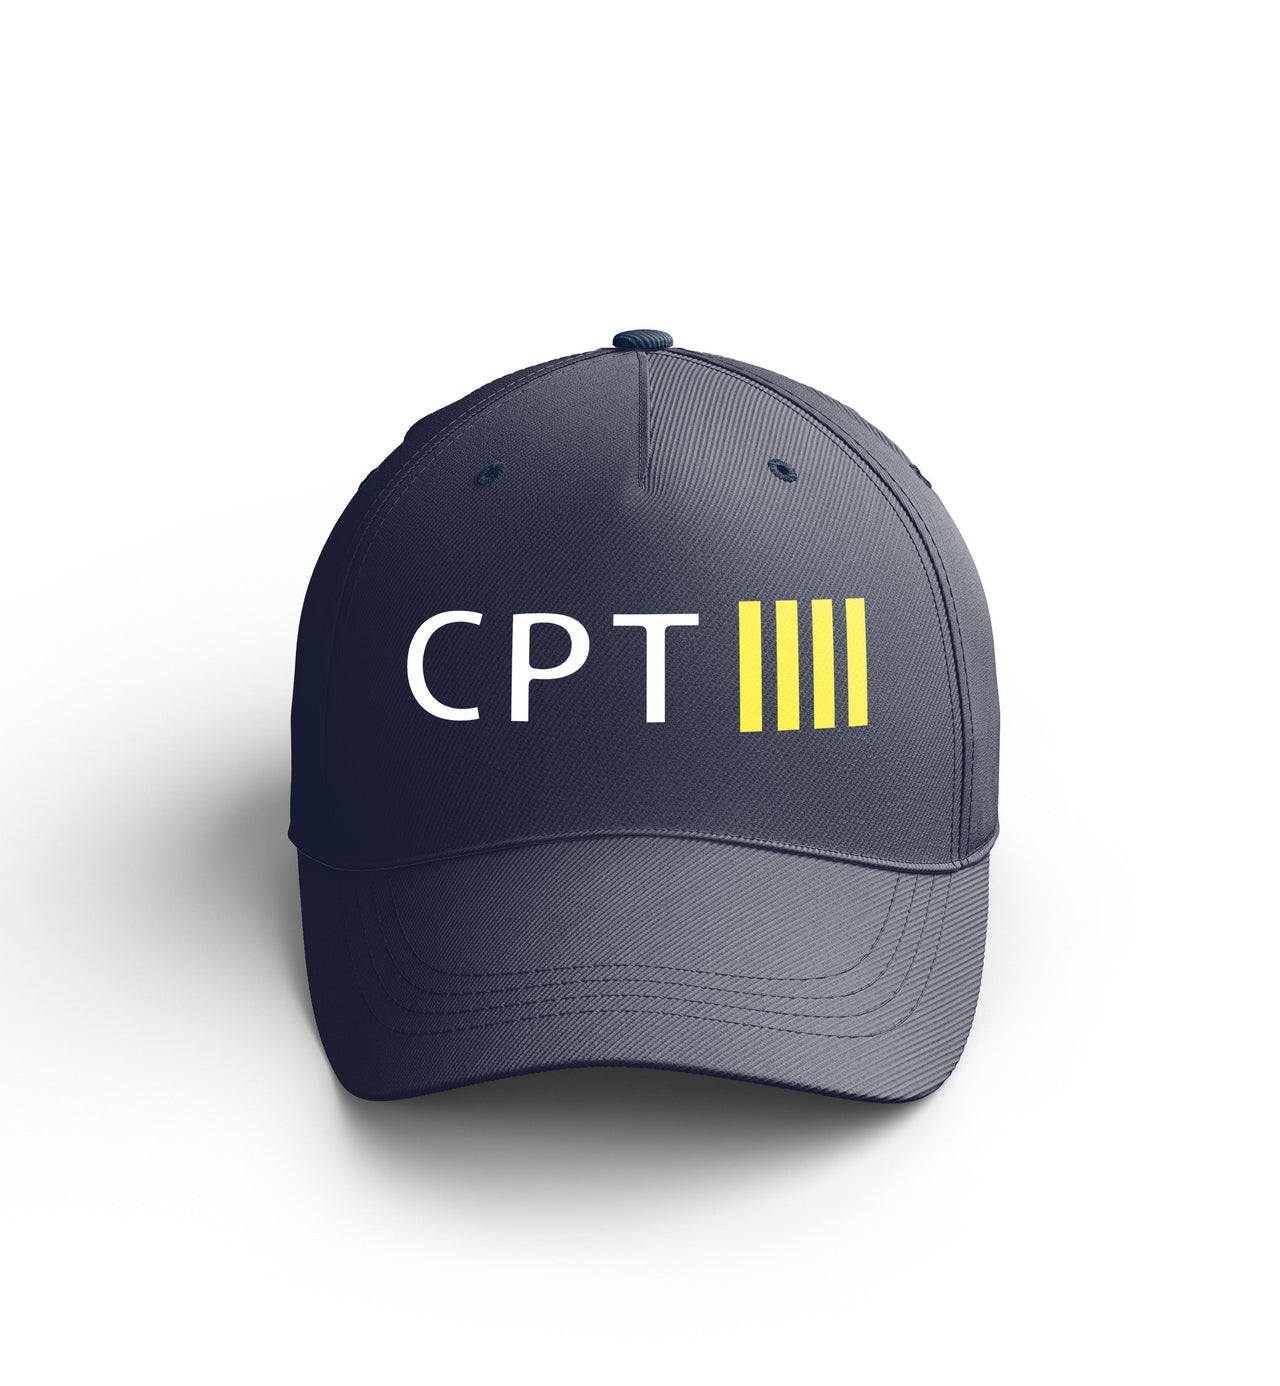 Customizable Name & CPT + 4 Lines Embroidered Hats